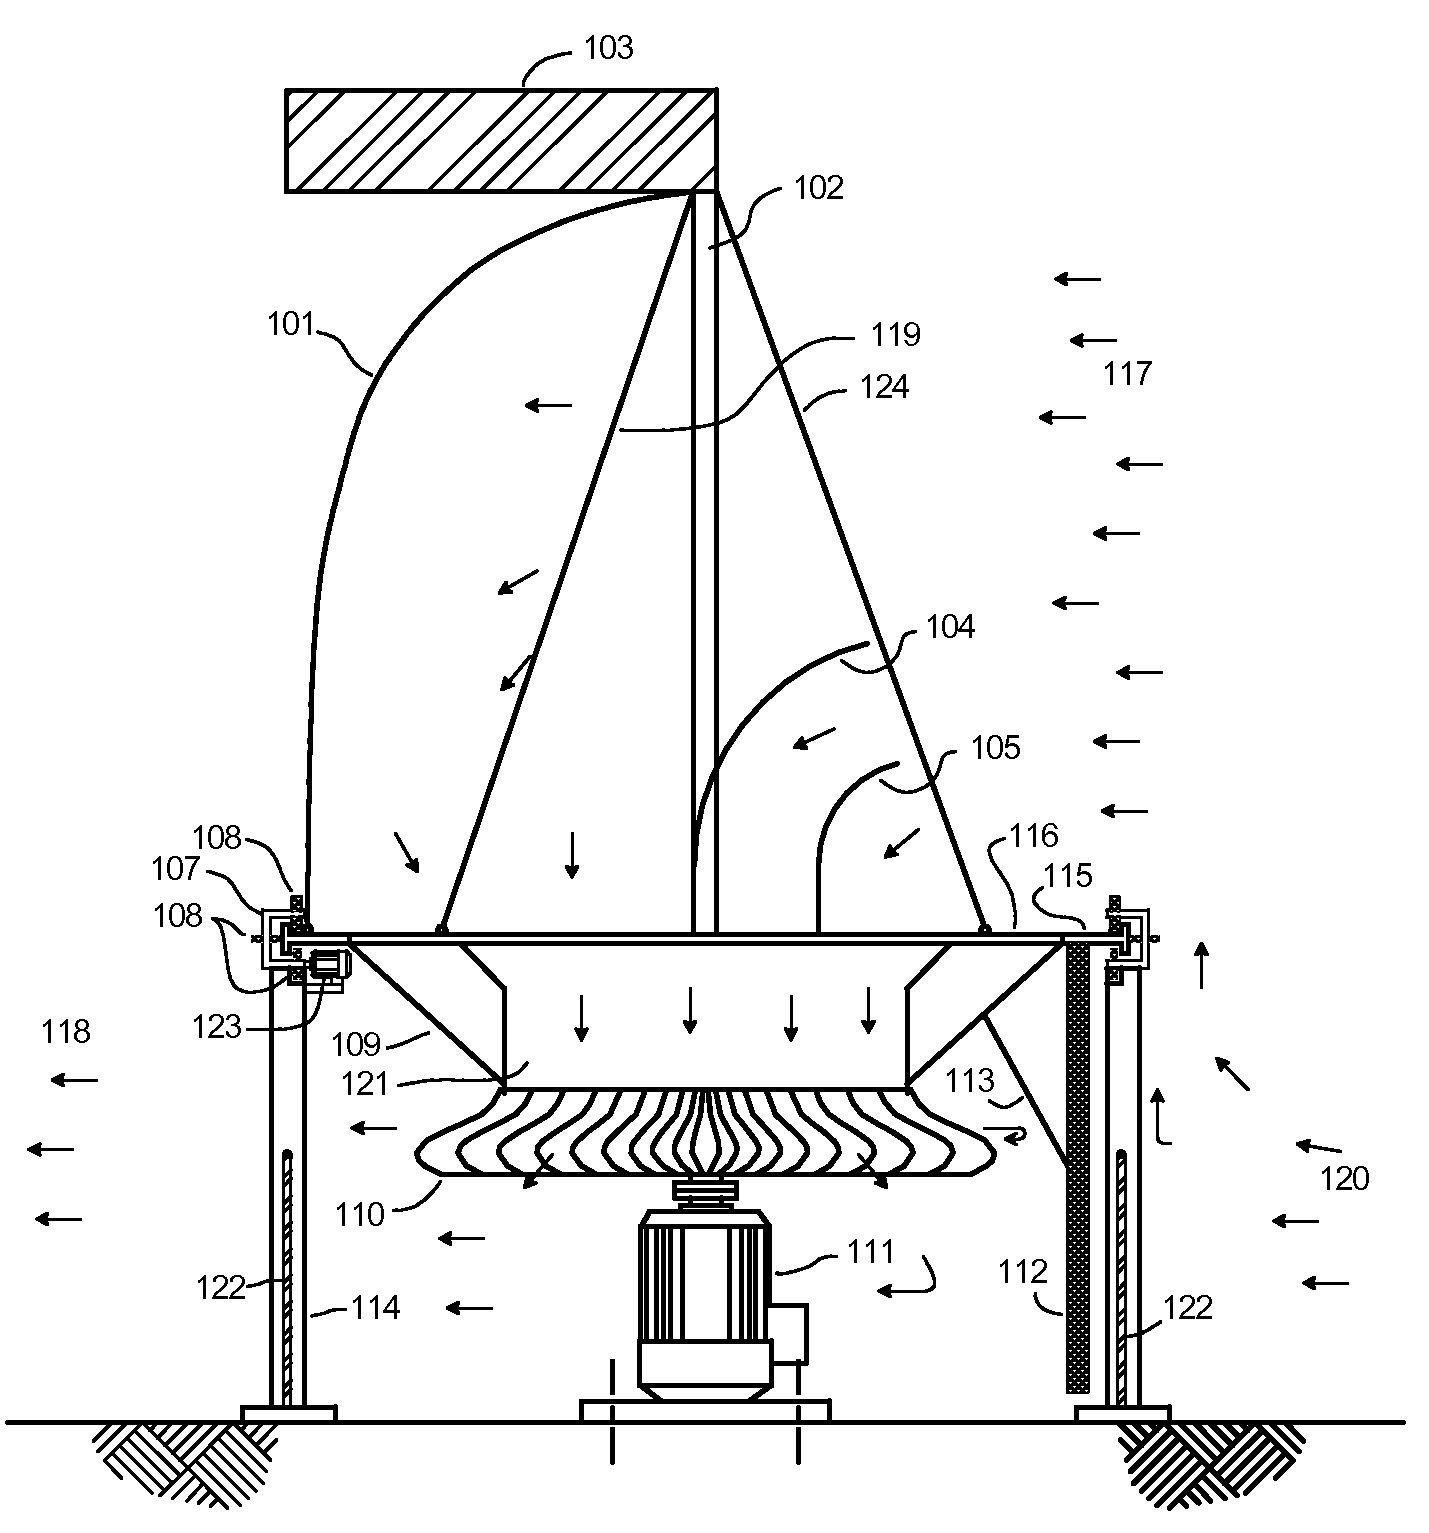 Vertical wind turbine system with adjustable inlet air scoop and exit drag curtain